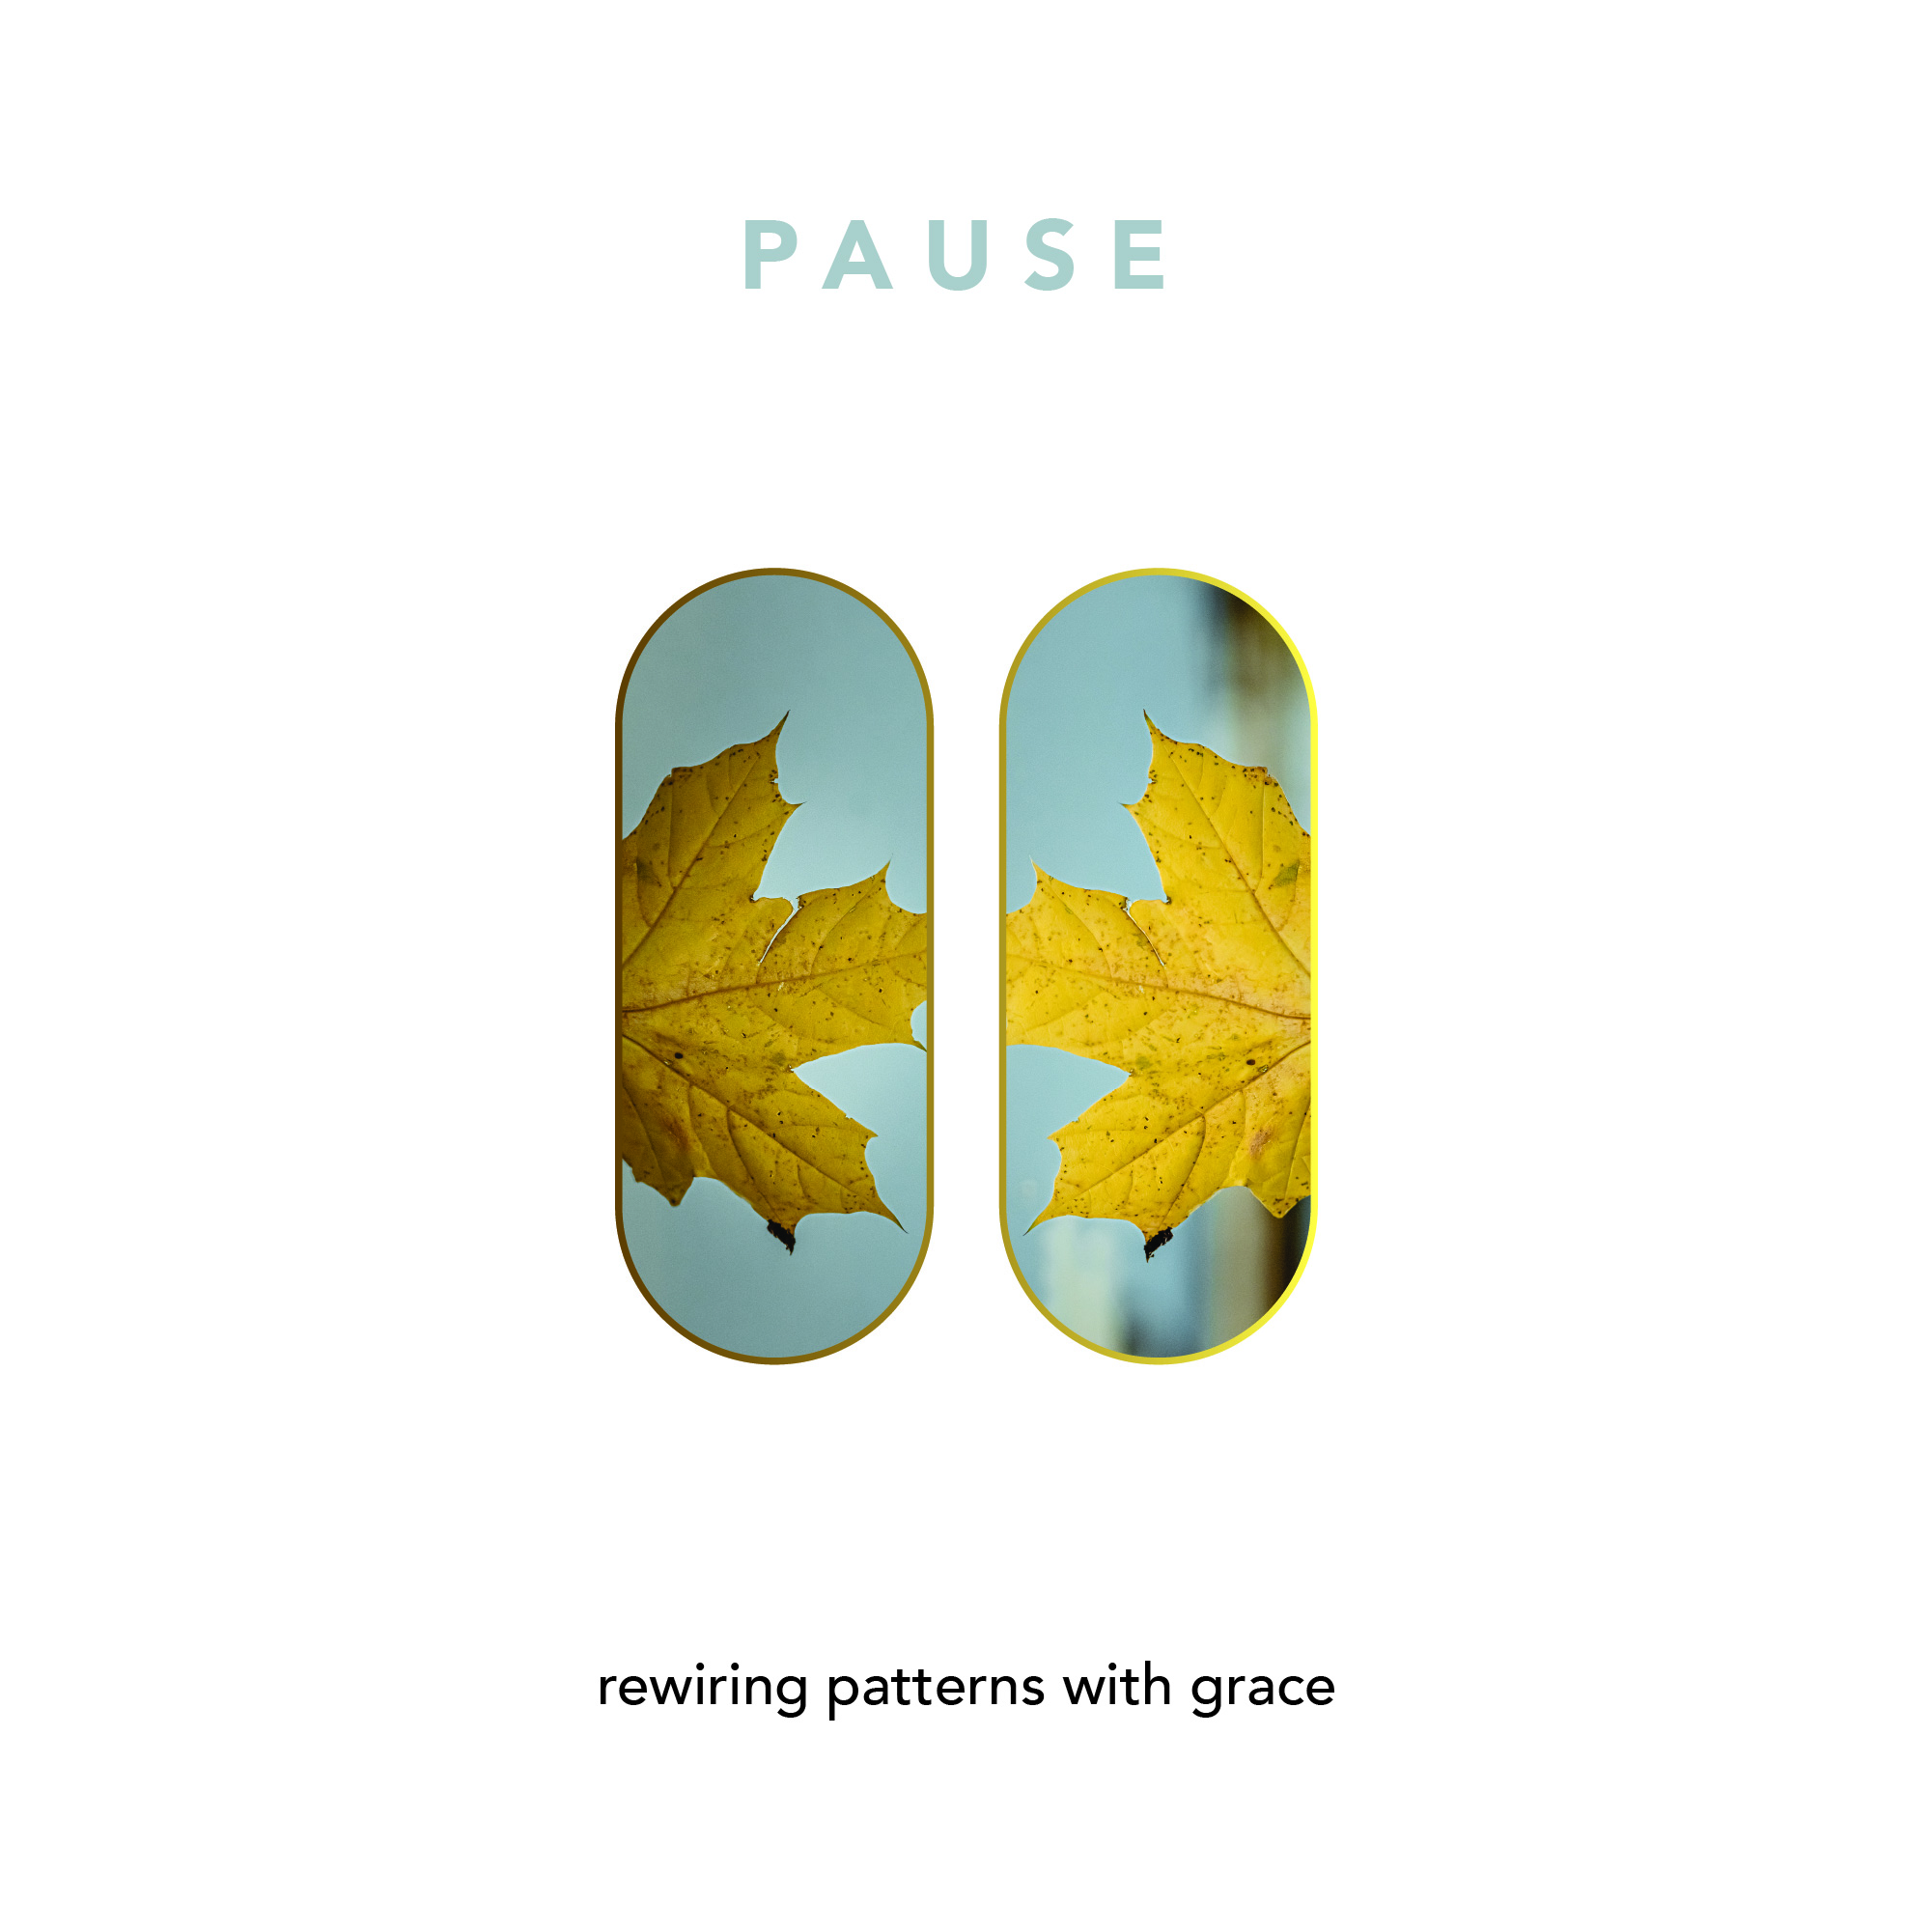 PAUSE - intentionally choose a path that feeds your soul